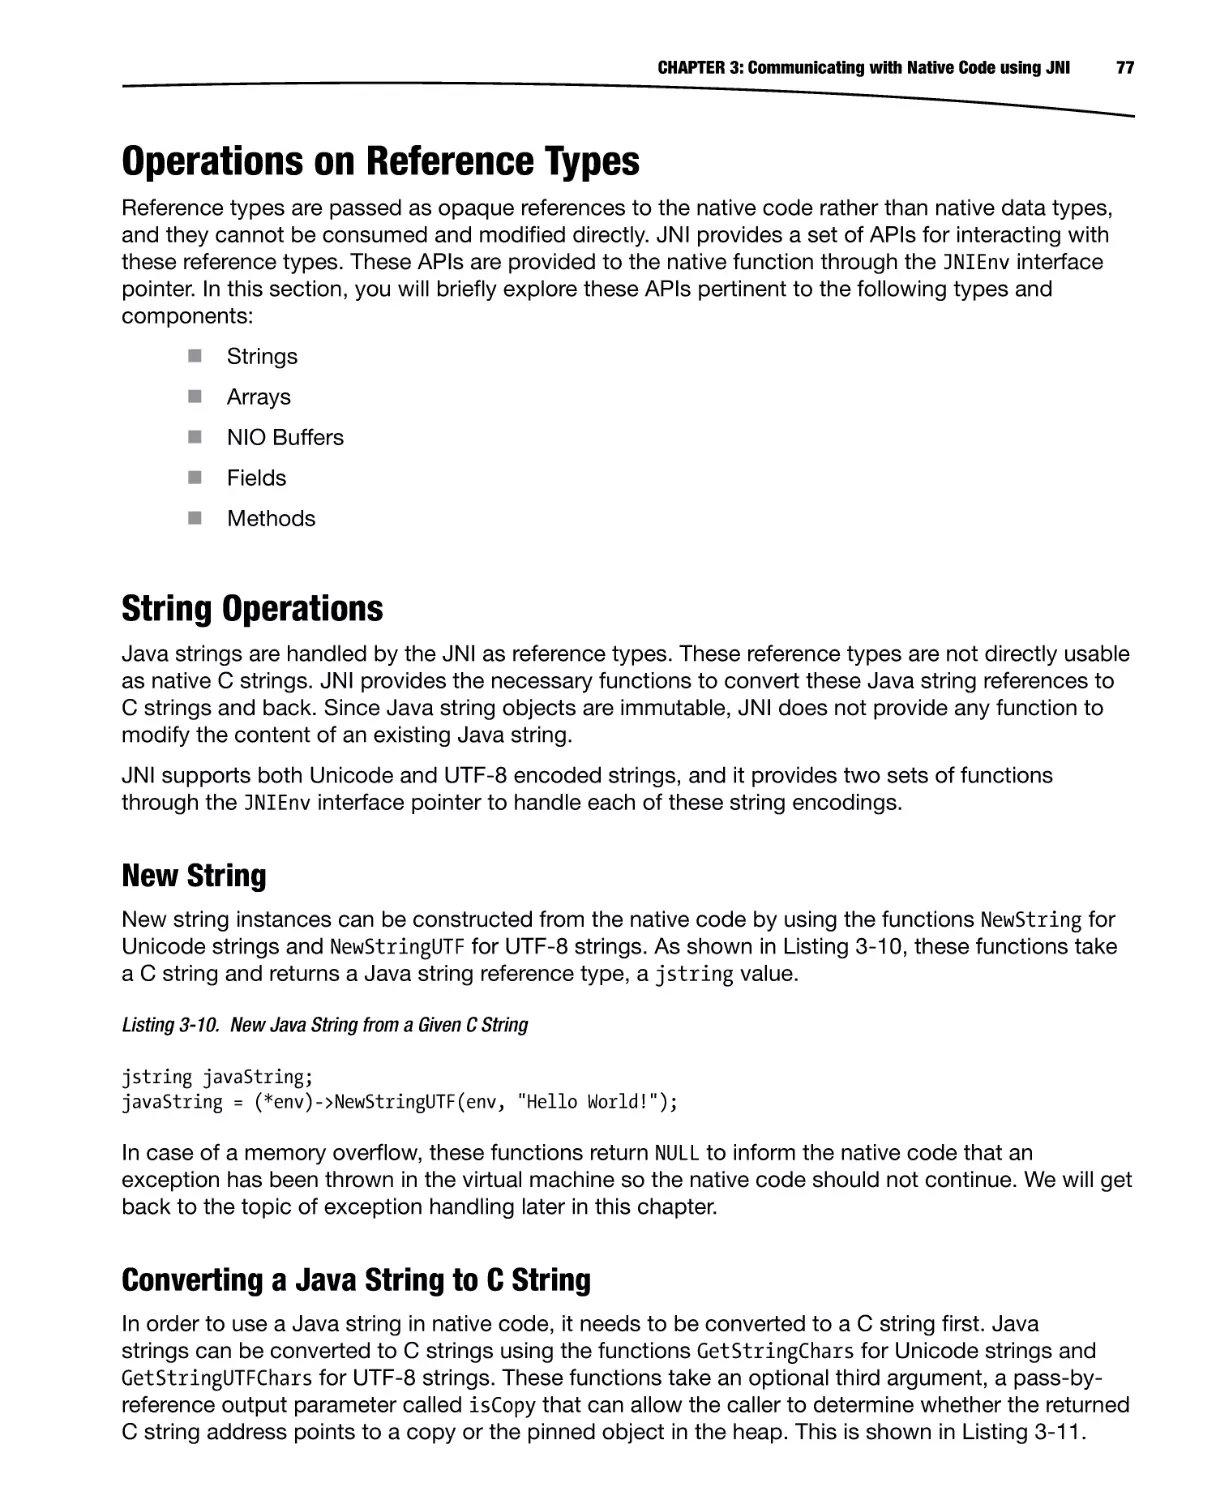 Operations on Reference Types
String Operations
New String
Converting a Java String to C String